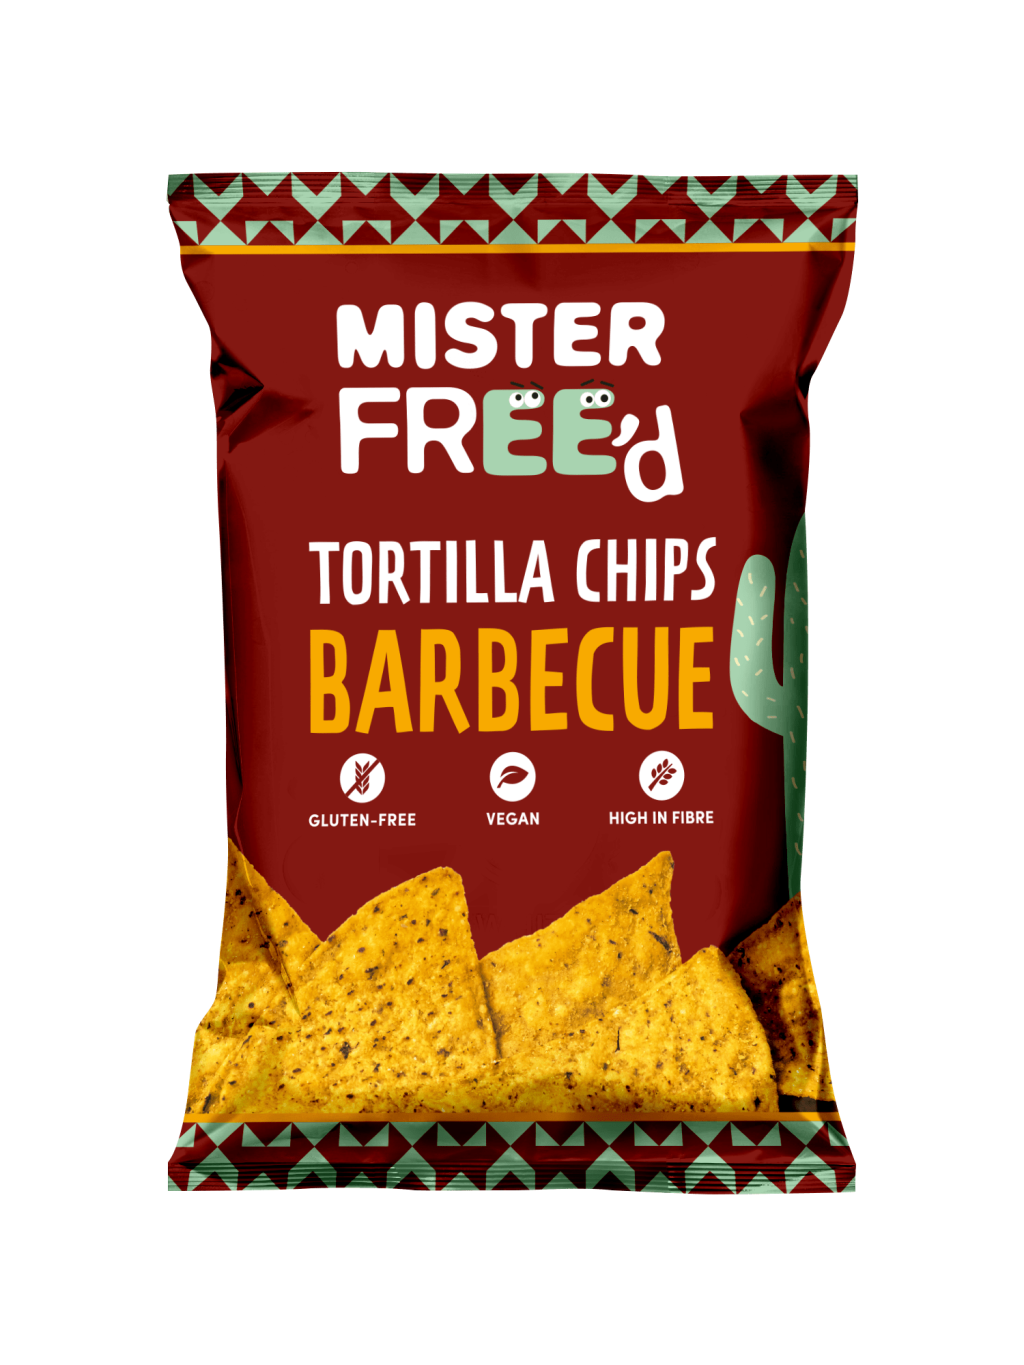 MISTER FREE'D Barbecue Tortilla Chips